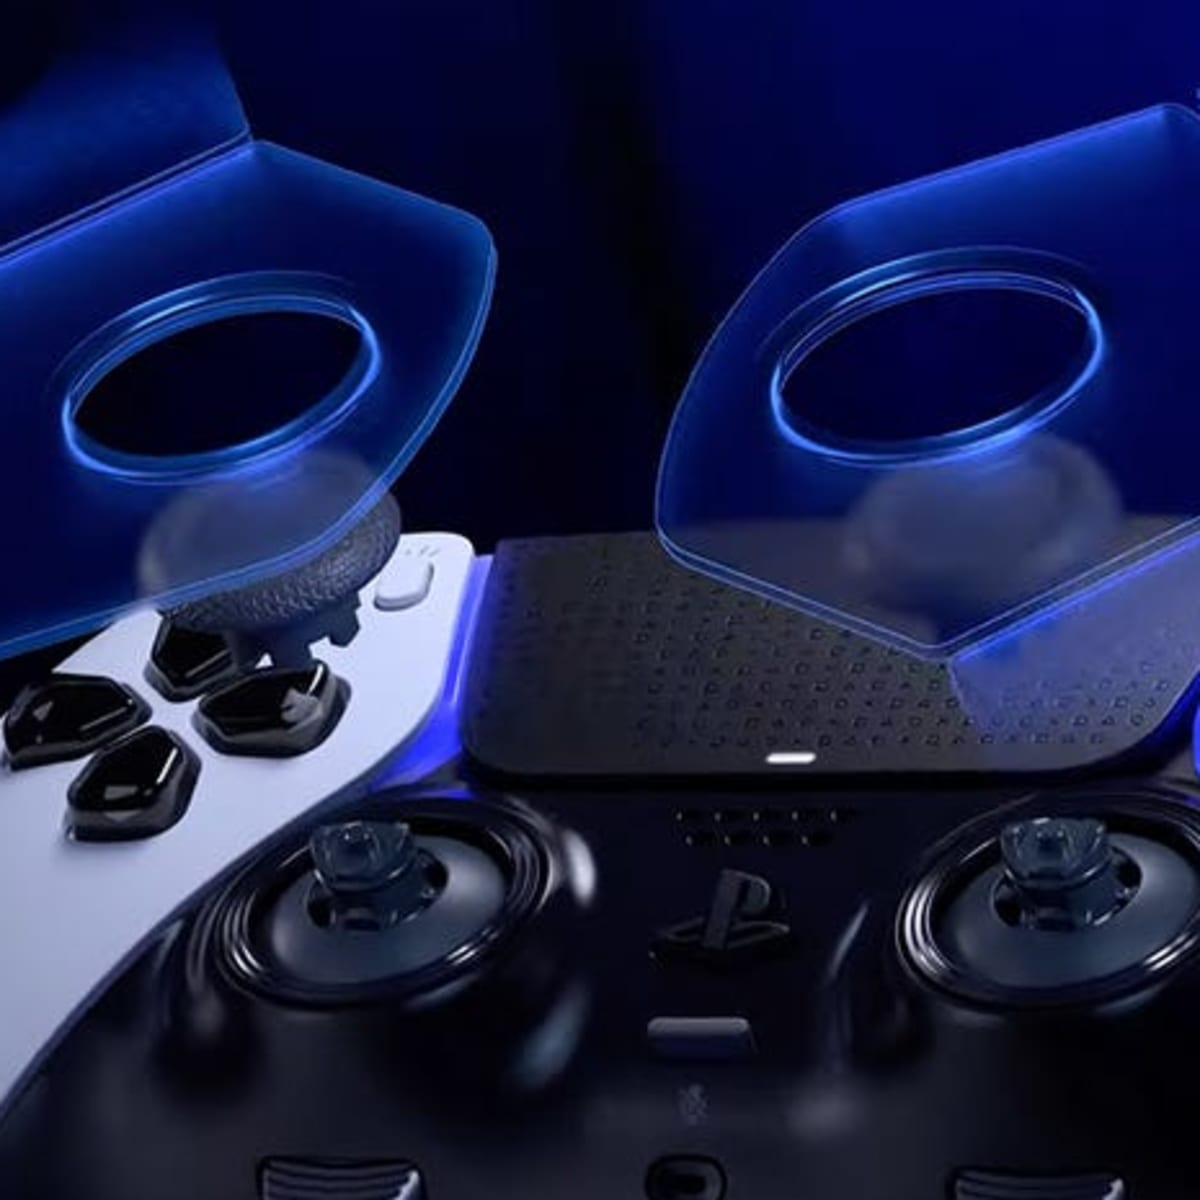 DualSense Edge: everything we know about the PS5 controller